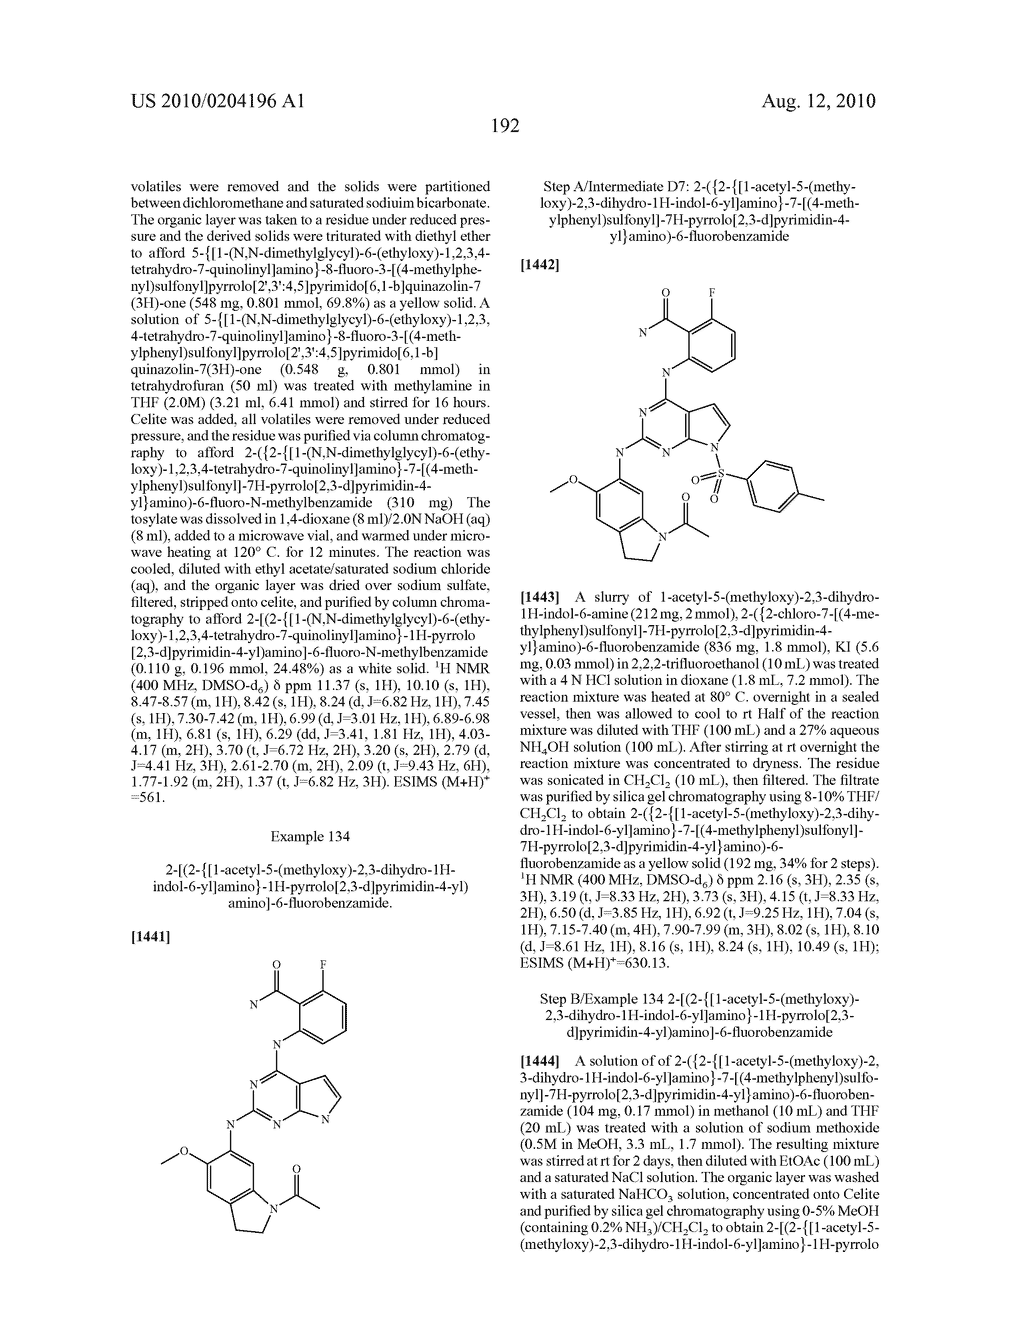 2-[2--1H-Pyrrolo[2,3-D]Pyrimidin-4-YL)Amino] Benzamide Derivatives As IGF-1R Inhibitors For The Treatment Of Cancer - diagram, schematic, and image 194